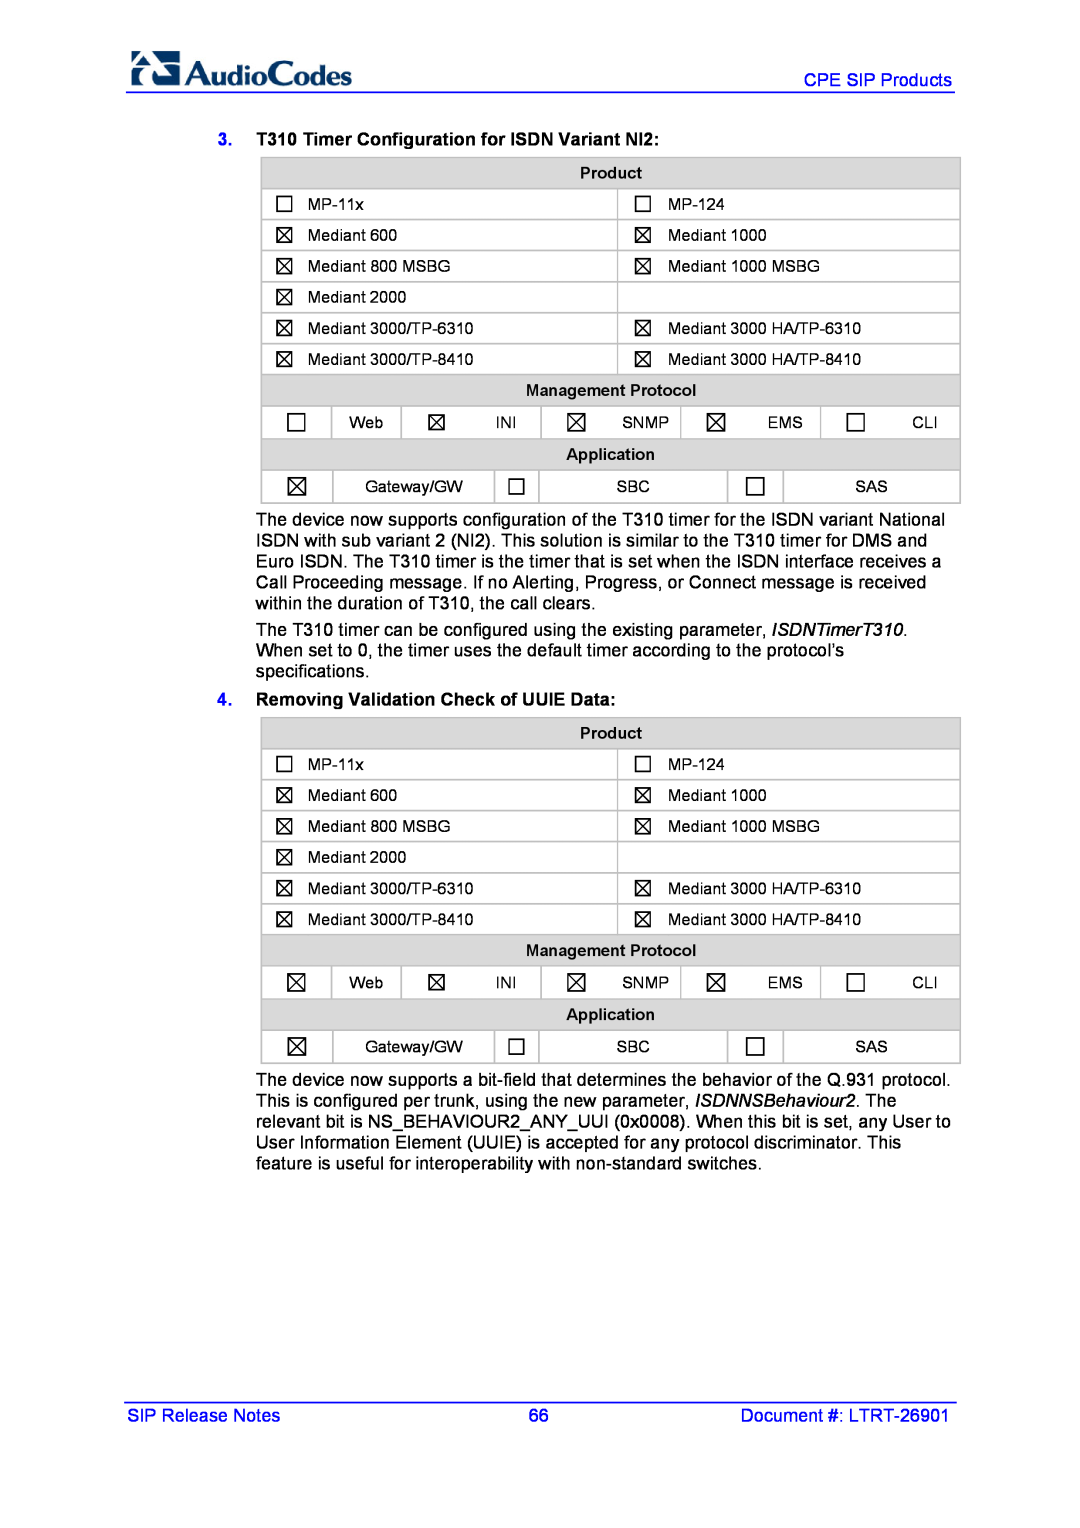 AudioControl VERSION 6.2 manual 3. T310 Timer Configuration for ISDN Variant NI2, Removing Validation Check of UUIE Data 